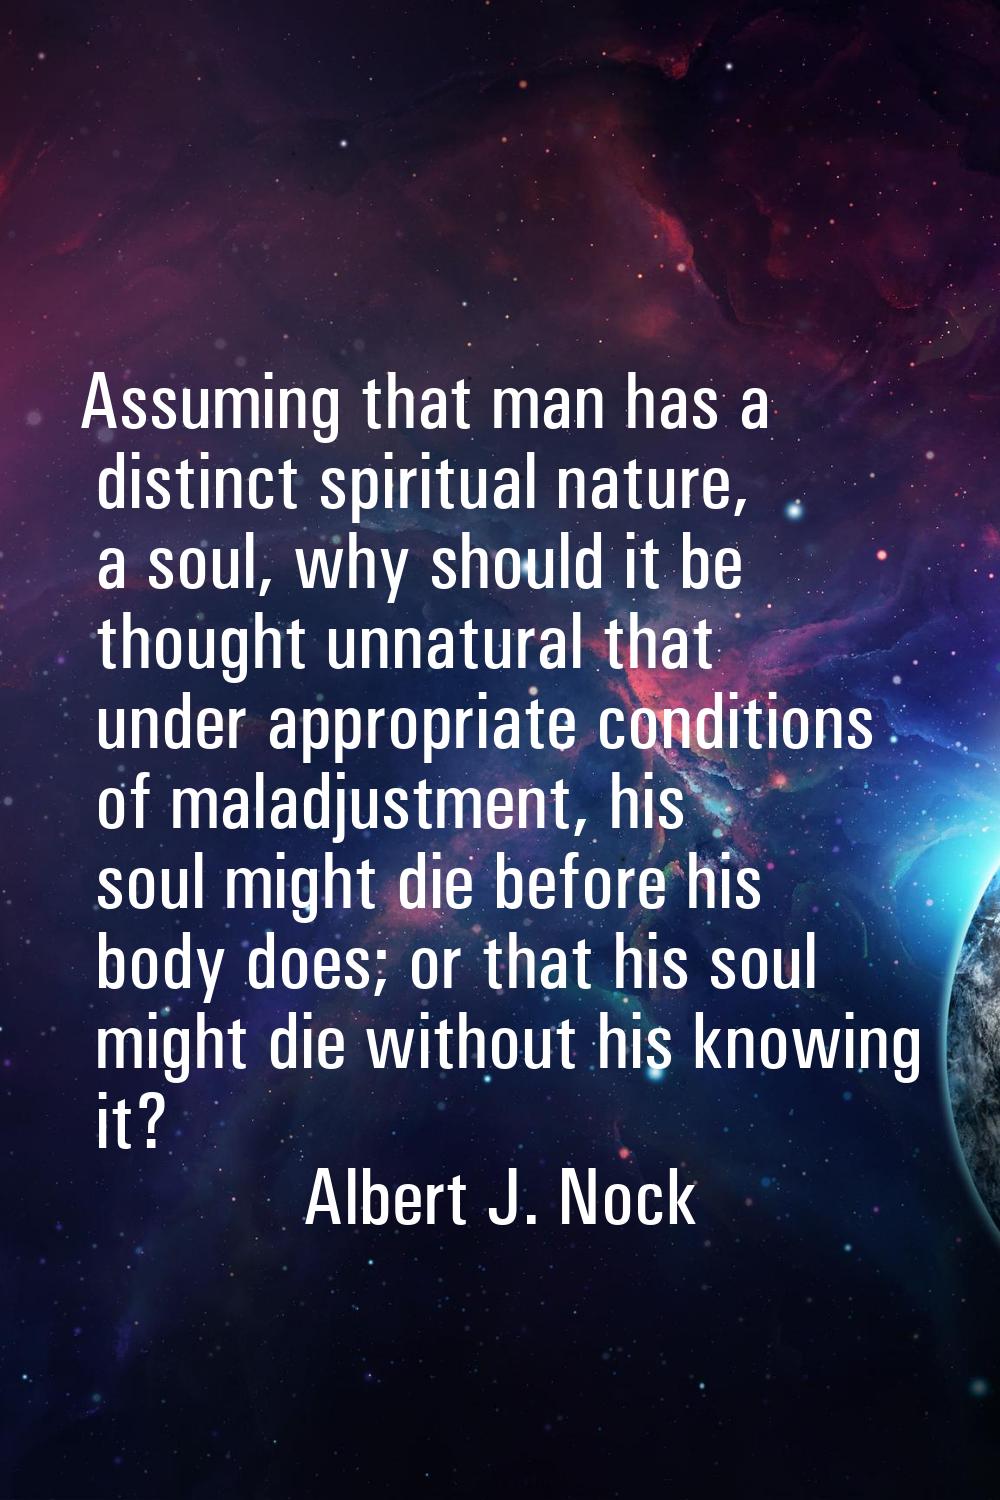 Assuming that man has a distinct spiritual nature, a soul, why should it be thought unnatural that 